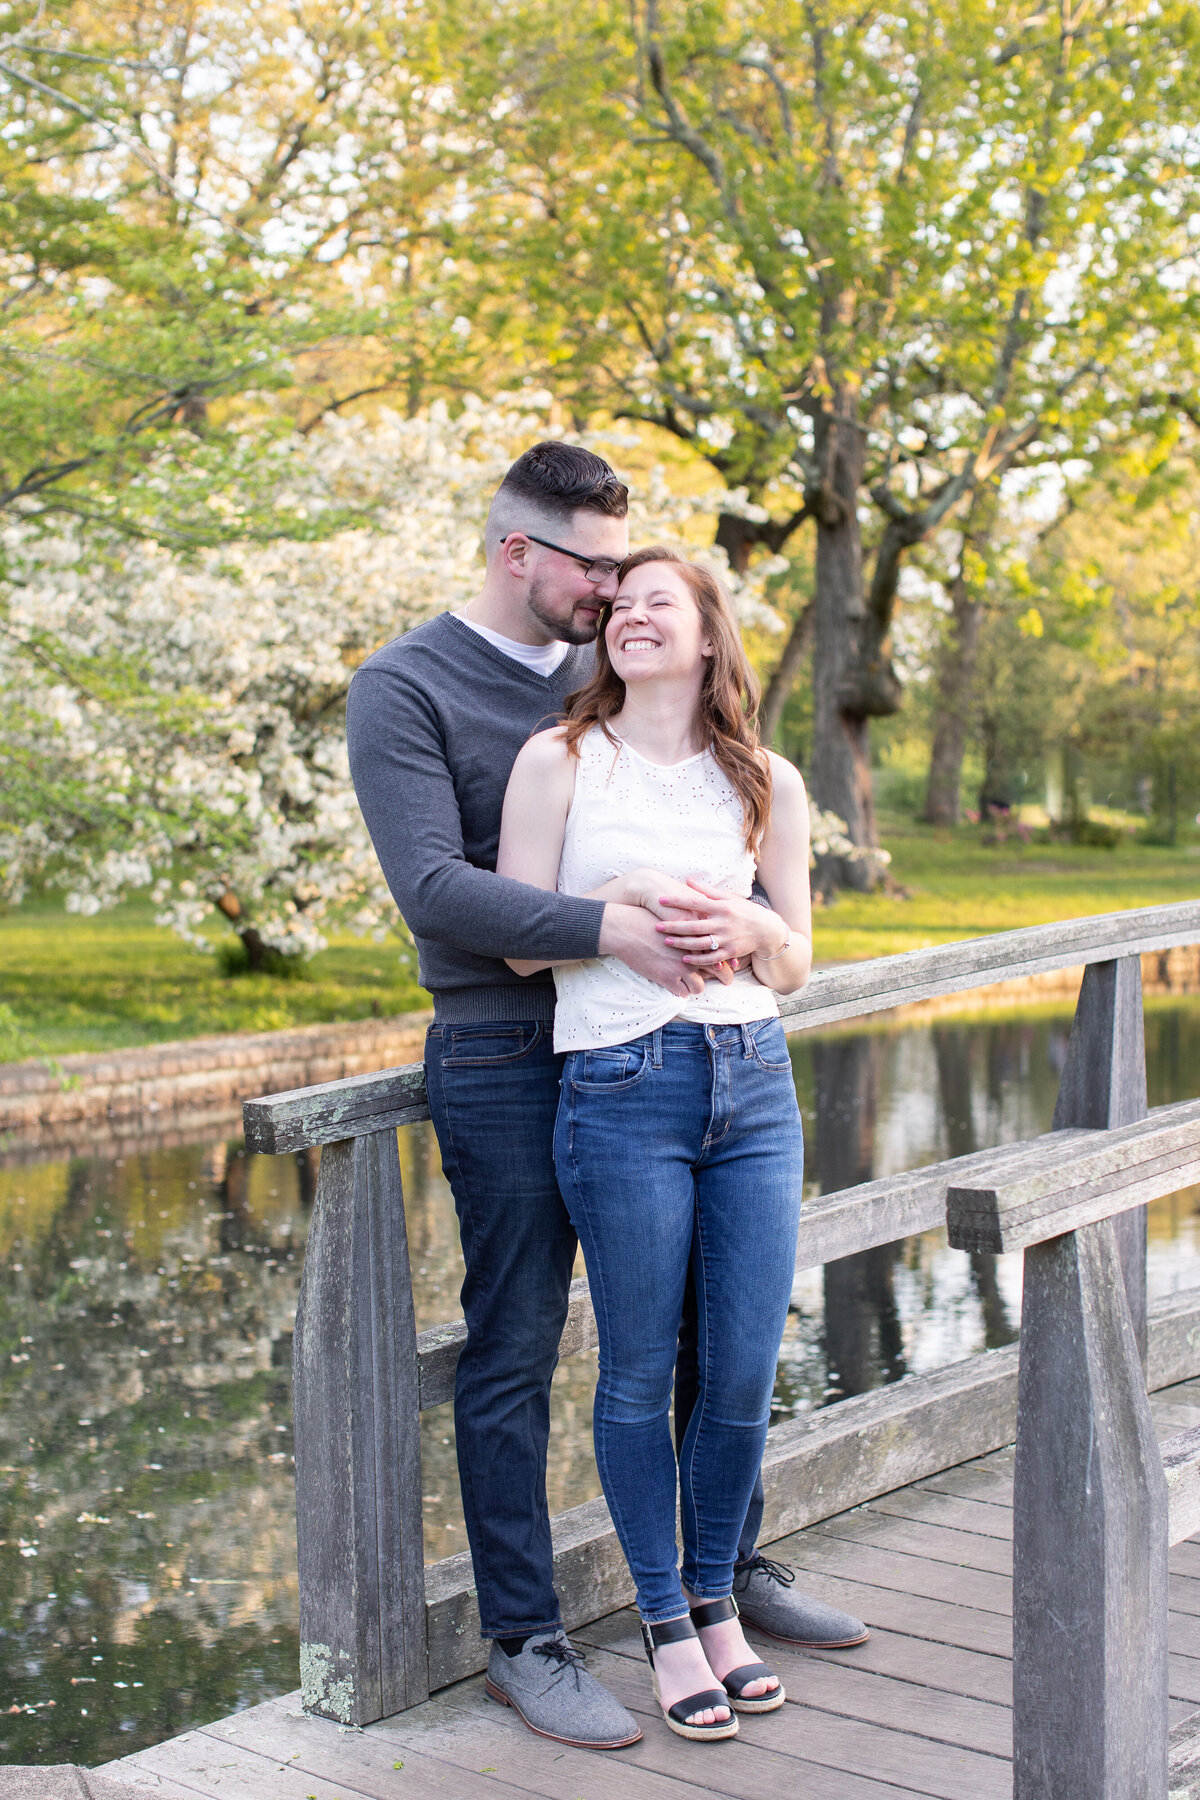 Danielle-Paul-Roger-Williams-Park-Engagement-Session-Kelly-Pomeroy-Photography-8176-2